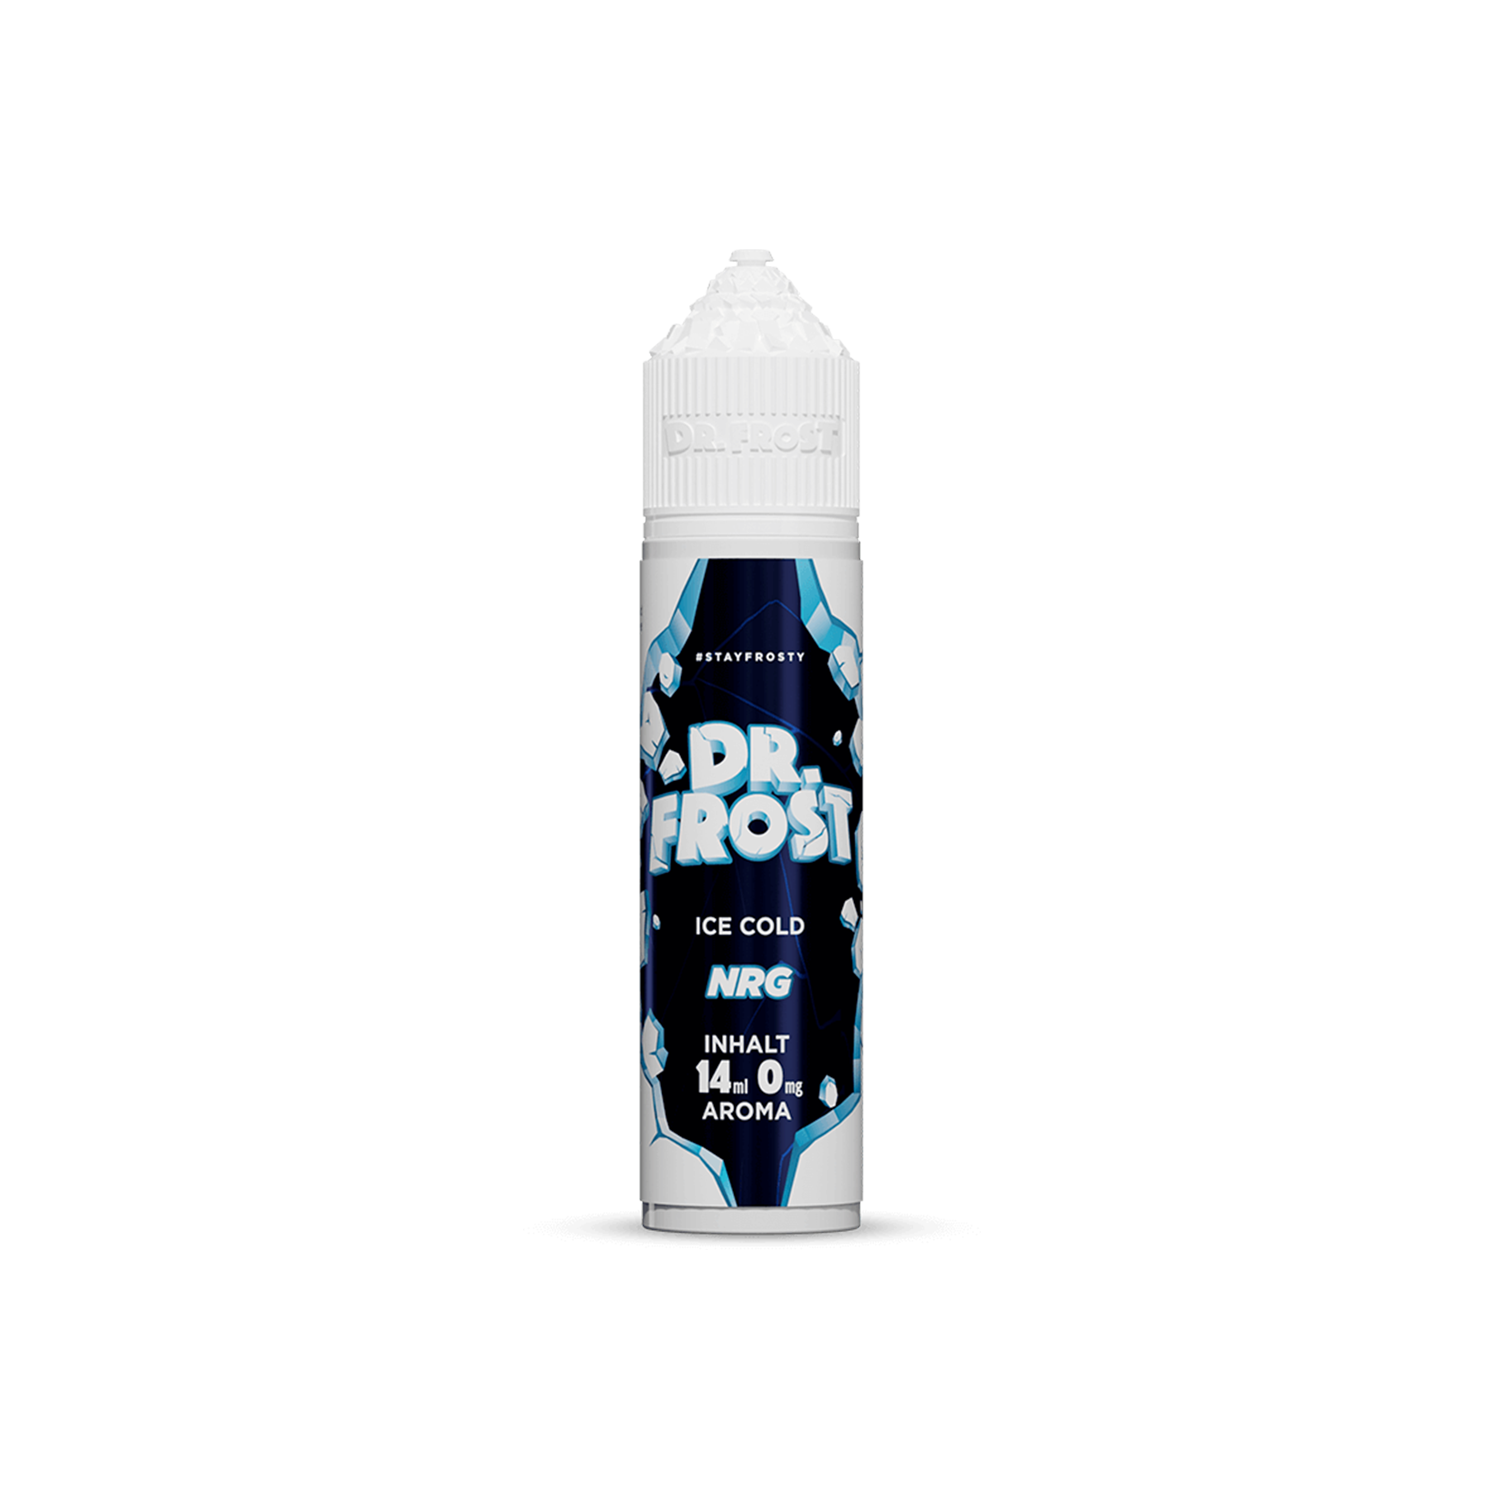 Dr. Frost - Ice Cold - NRG 14ml Aroma